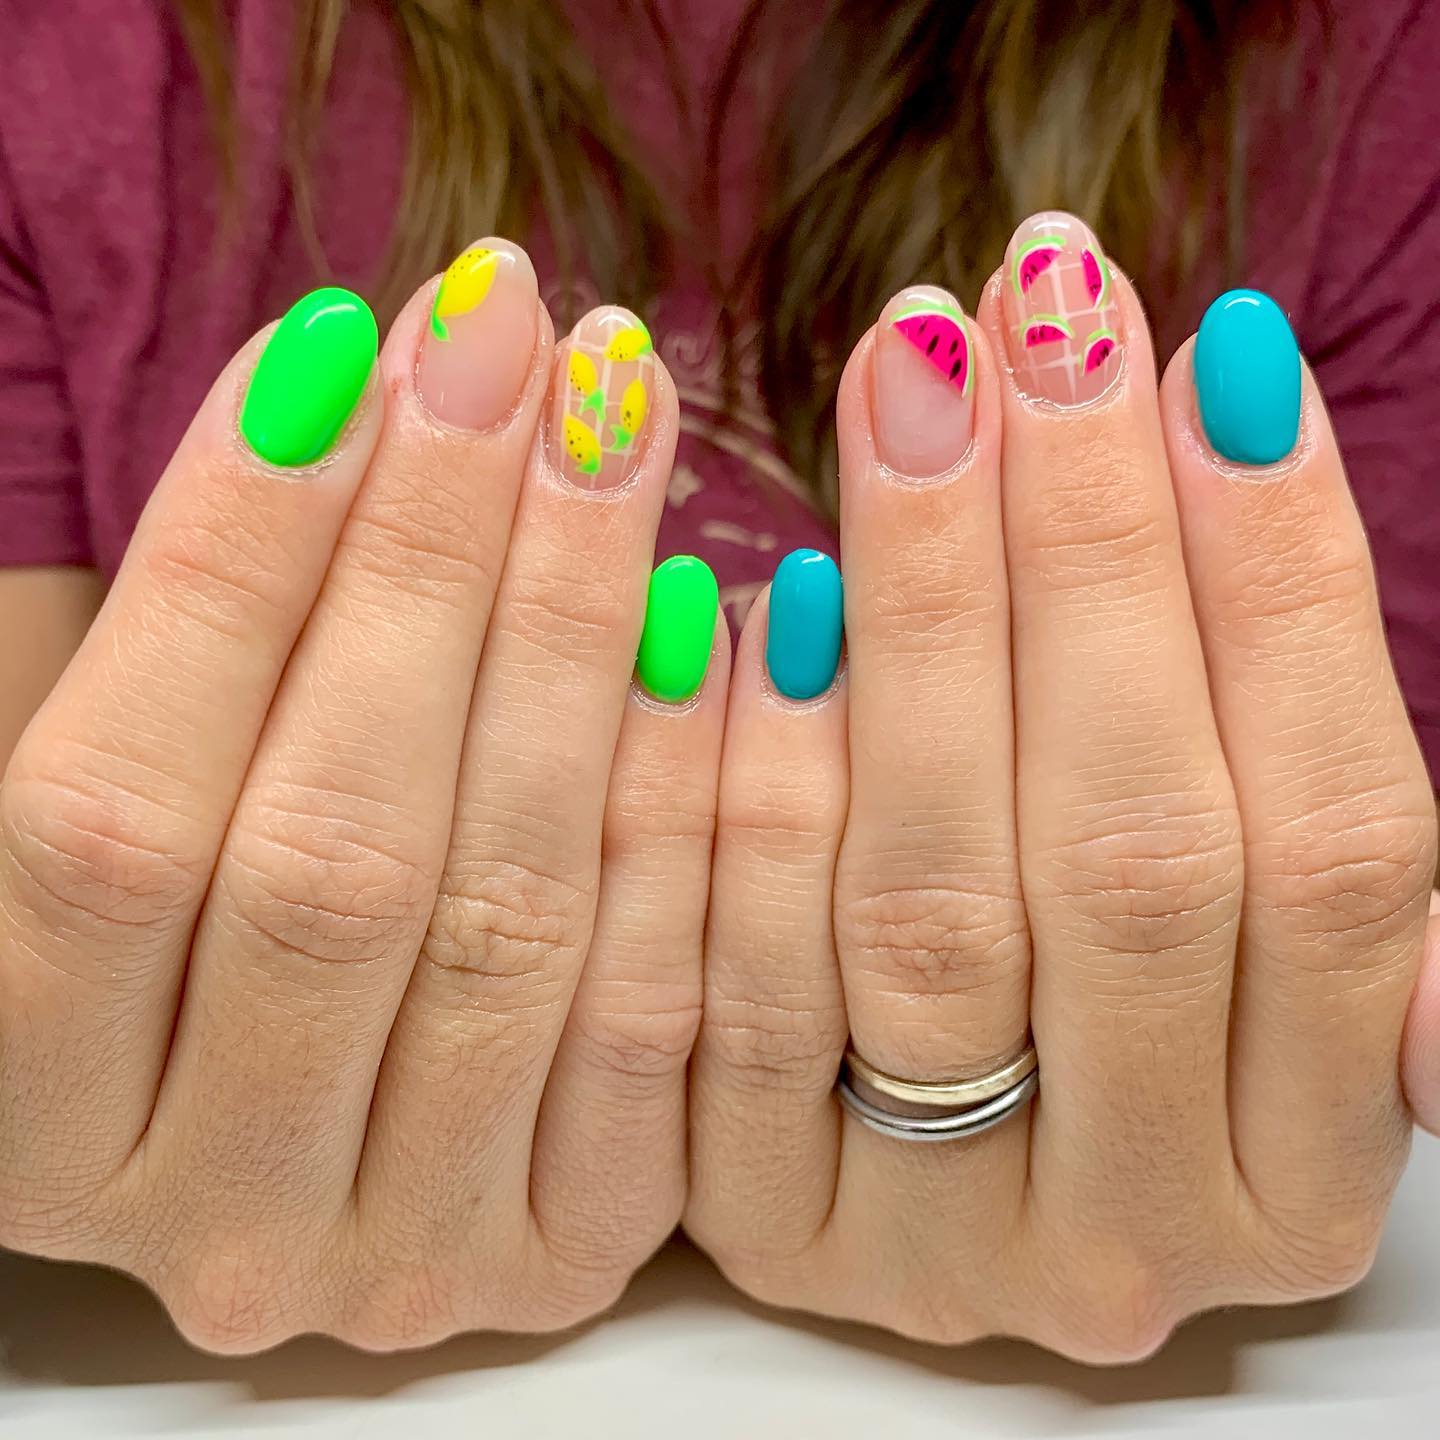 Here is a nice idea for indecisive women again. Yellow, green, blue and pink colors are used in just one nail design here. Watermelon and lemon nail arts are so cute to try on your nails.